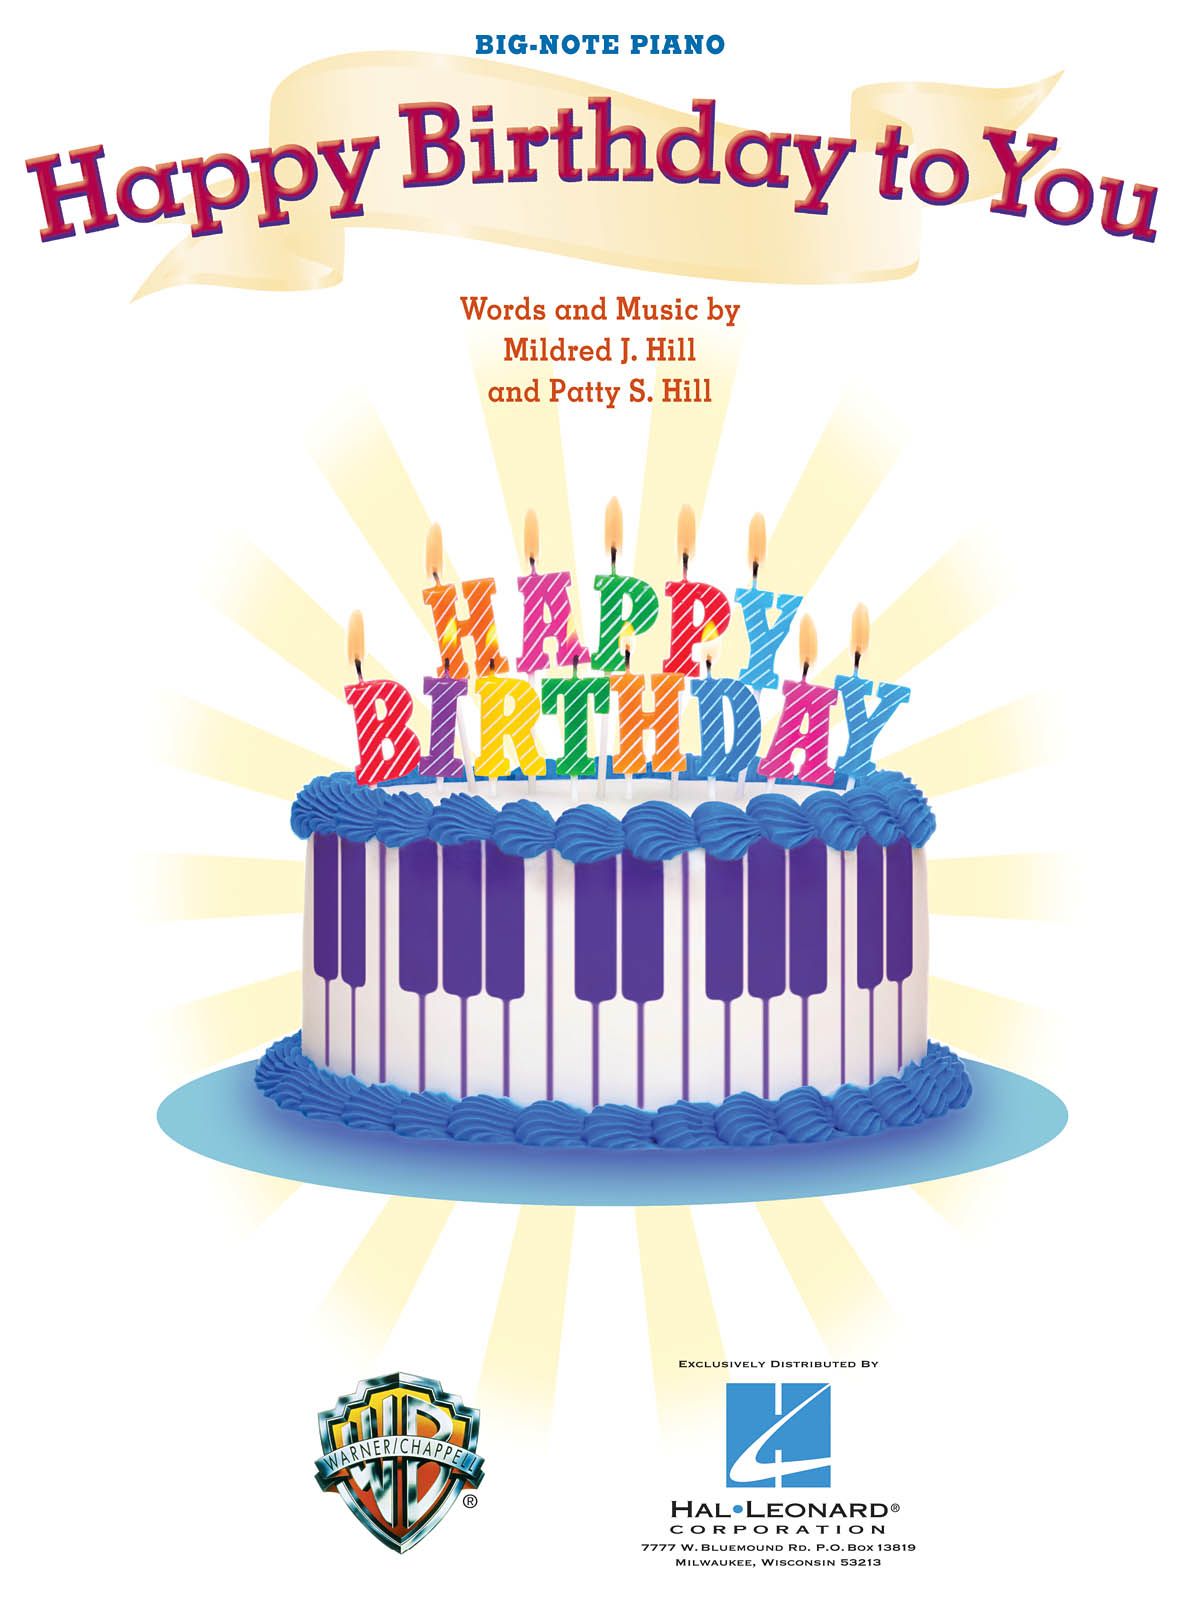 Happy Birthday To You (Big-Note Piano) by Mildred J. Hill »